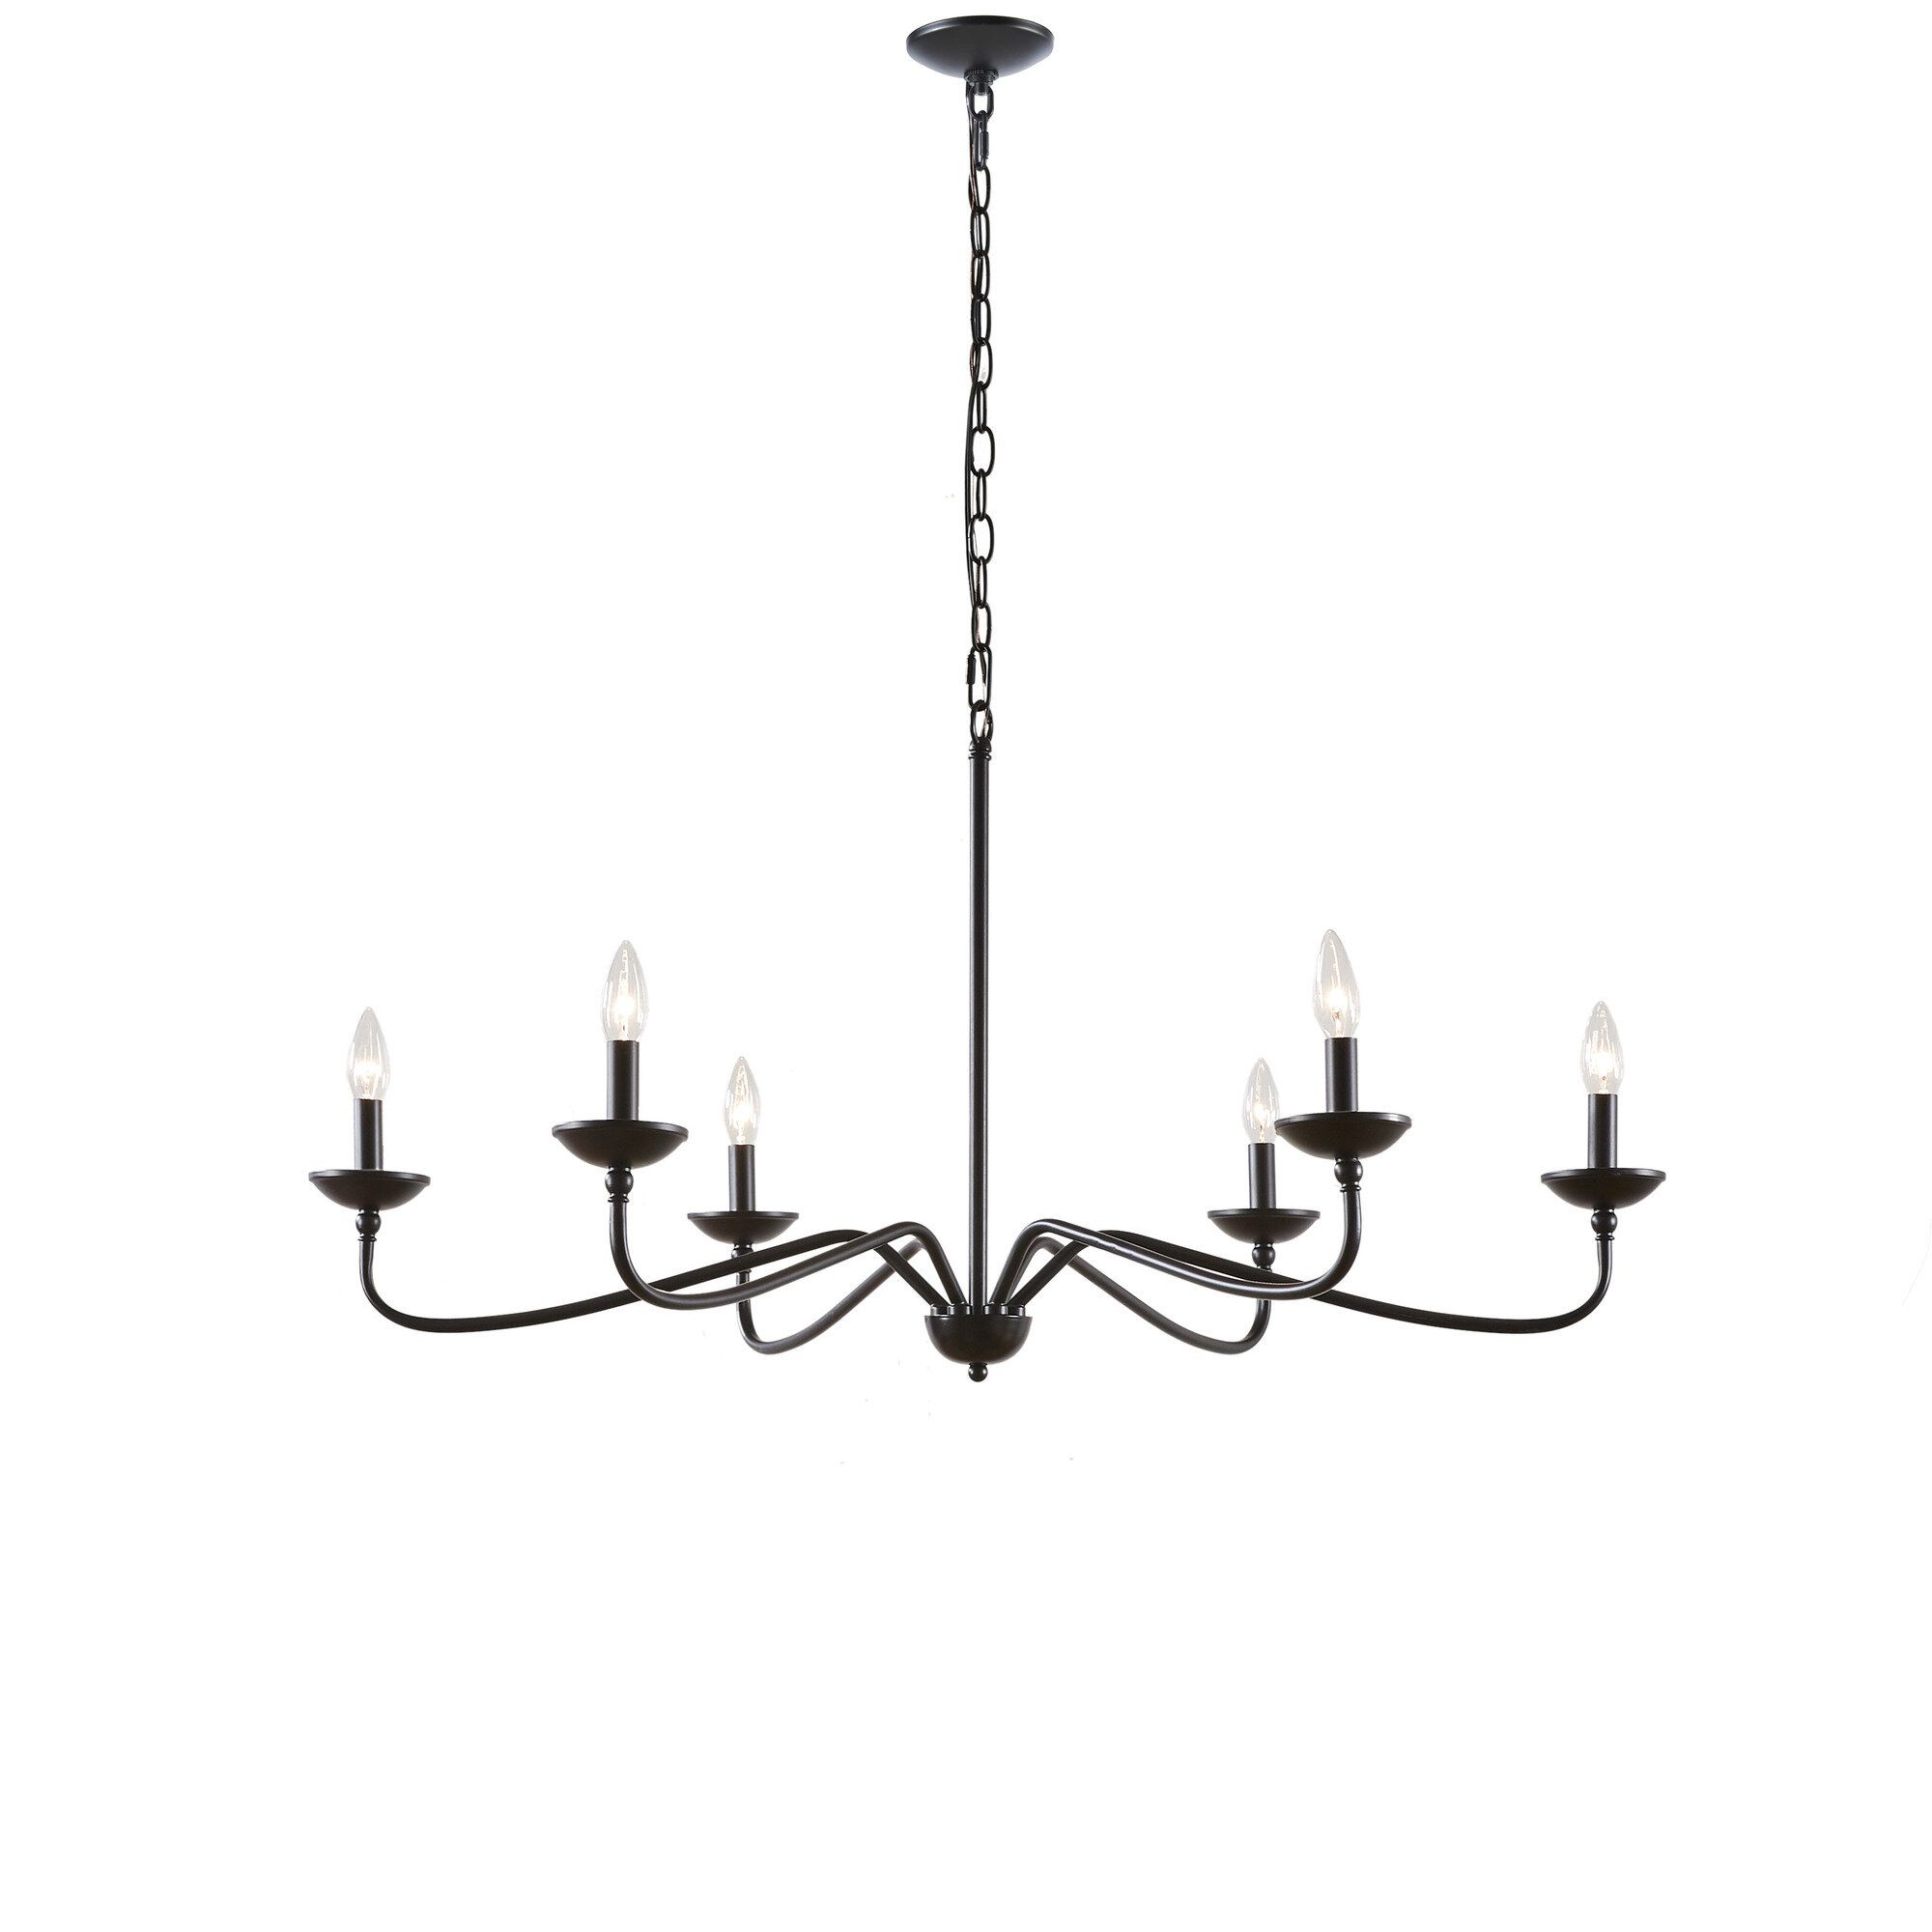 Scannell 6 Light Candle Style Chandelier Pertaining To Perseus 6 Light Candle Style Chandeliers (View 9 of 30)